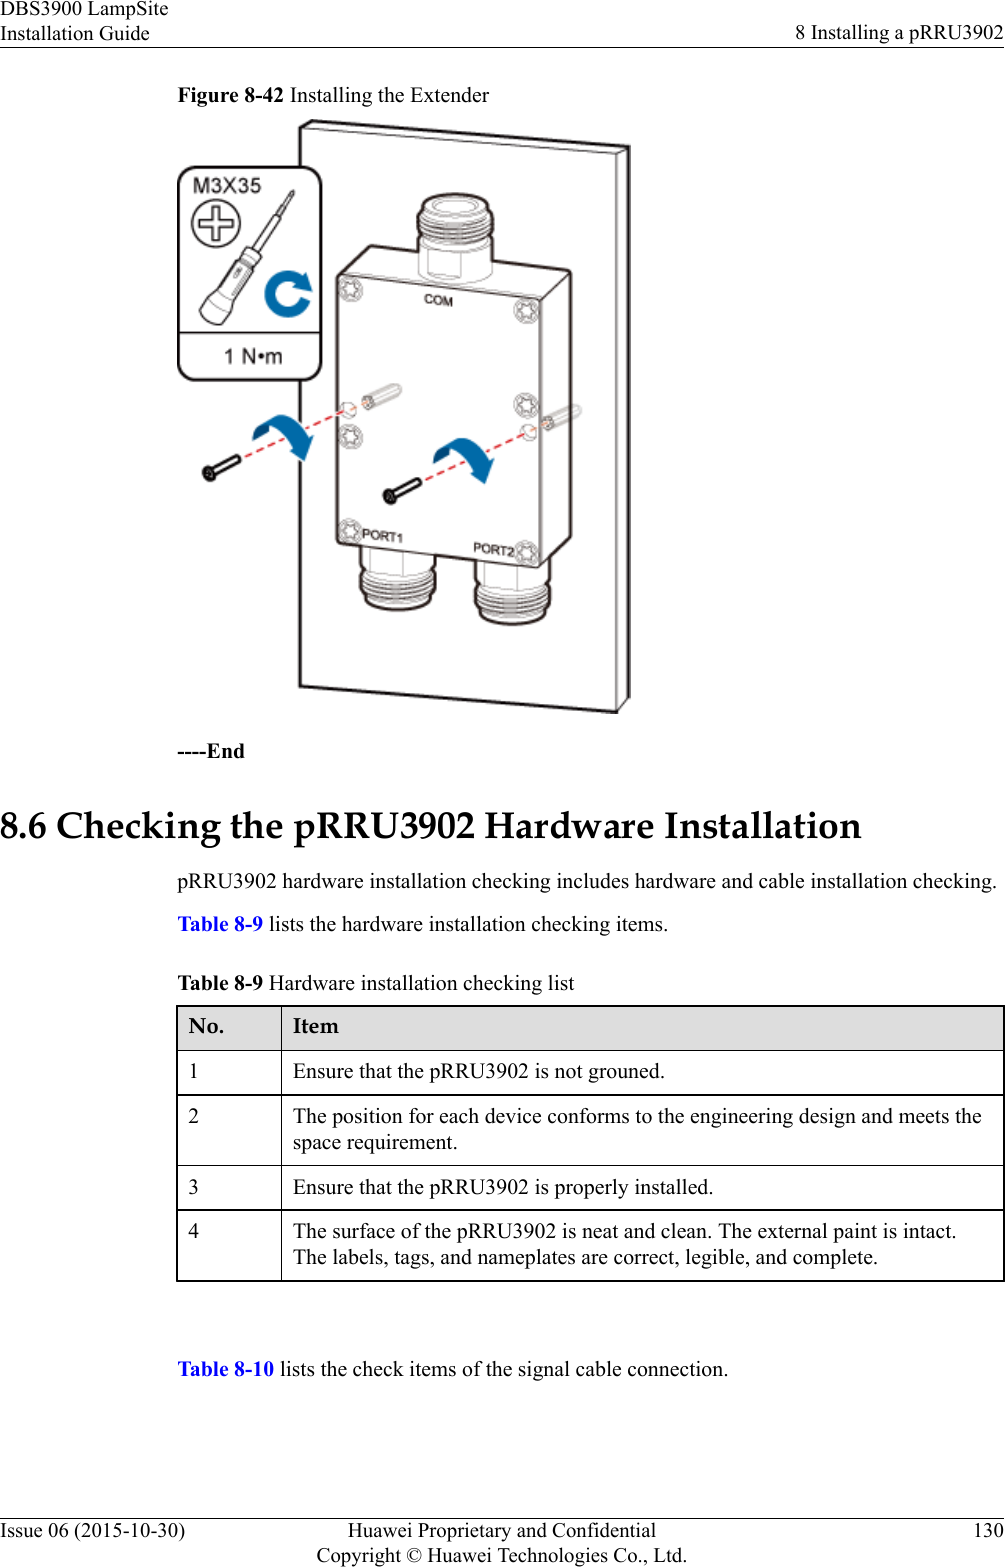 Figure 8-42 Installing the Extender----End8.6 Checking the pRRU3902 Hardware InstallationpRRU3902 hardware installation checking includes hardware and cable installation checking.Table 8-9 lists the hardware installation checking items.Table 8-9 Hardware installation checking listNo. Item1 Ensure that the pRRU3902 is not grouned.2 The position for each device conforms to the engineering design and meets thespace requirement.3 Ensure that the pRRU3902 is properly installed.4 The surface of the pRRU3902 is neat and clean. The external paint is intact.The labels, tags, and nameplates are correct, legible, and complete. Table 8-10 lists the check items of the signal cable connection.DBS3900 LampSiteInstallation Guide 8 Installing a pRRU3902Issue 06 (2015-10-30) Huawei Proprietary and ConfidentialCopyright © Huawei Technologies Co., Ltd.130